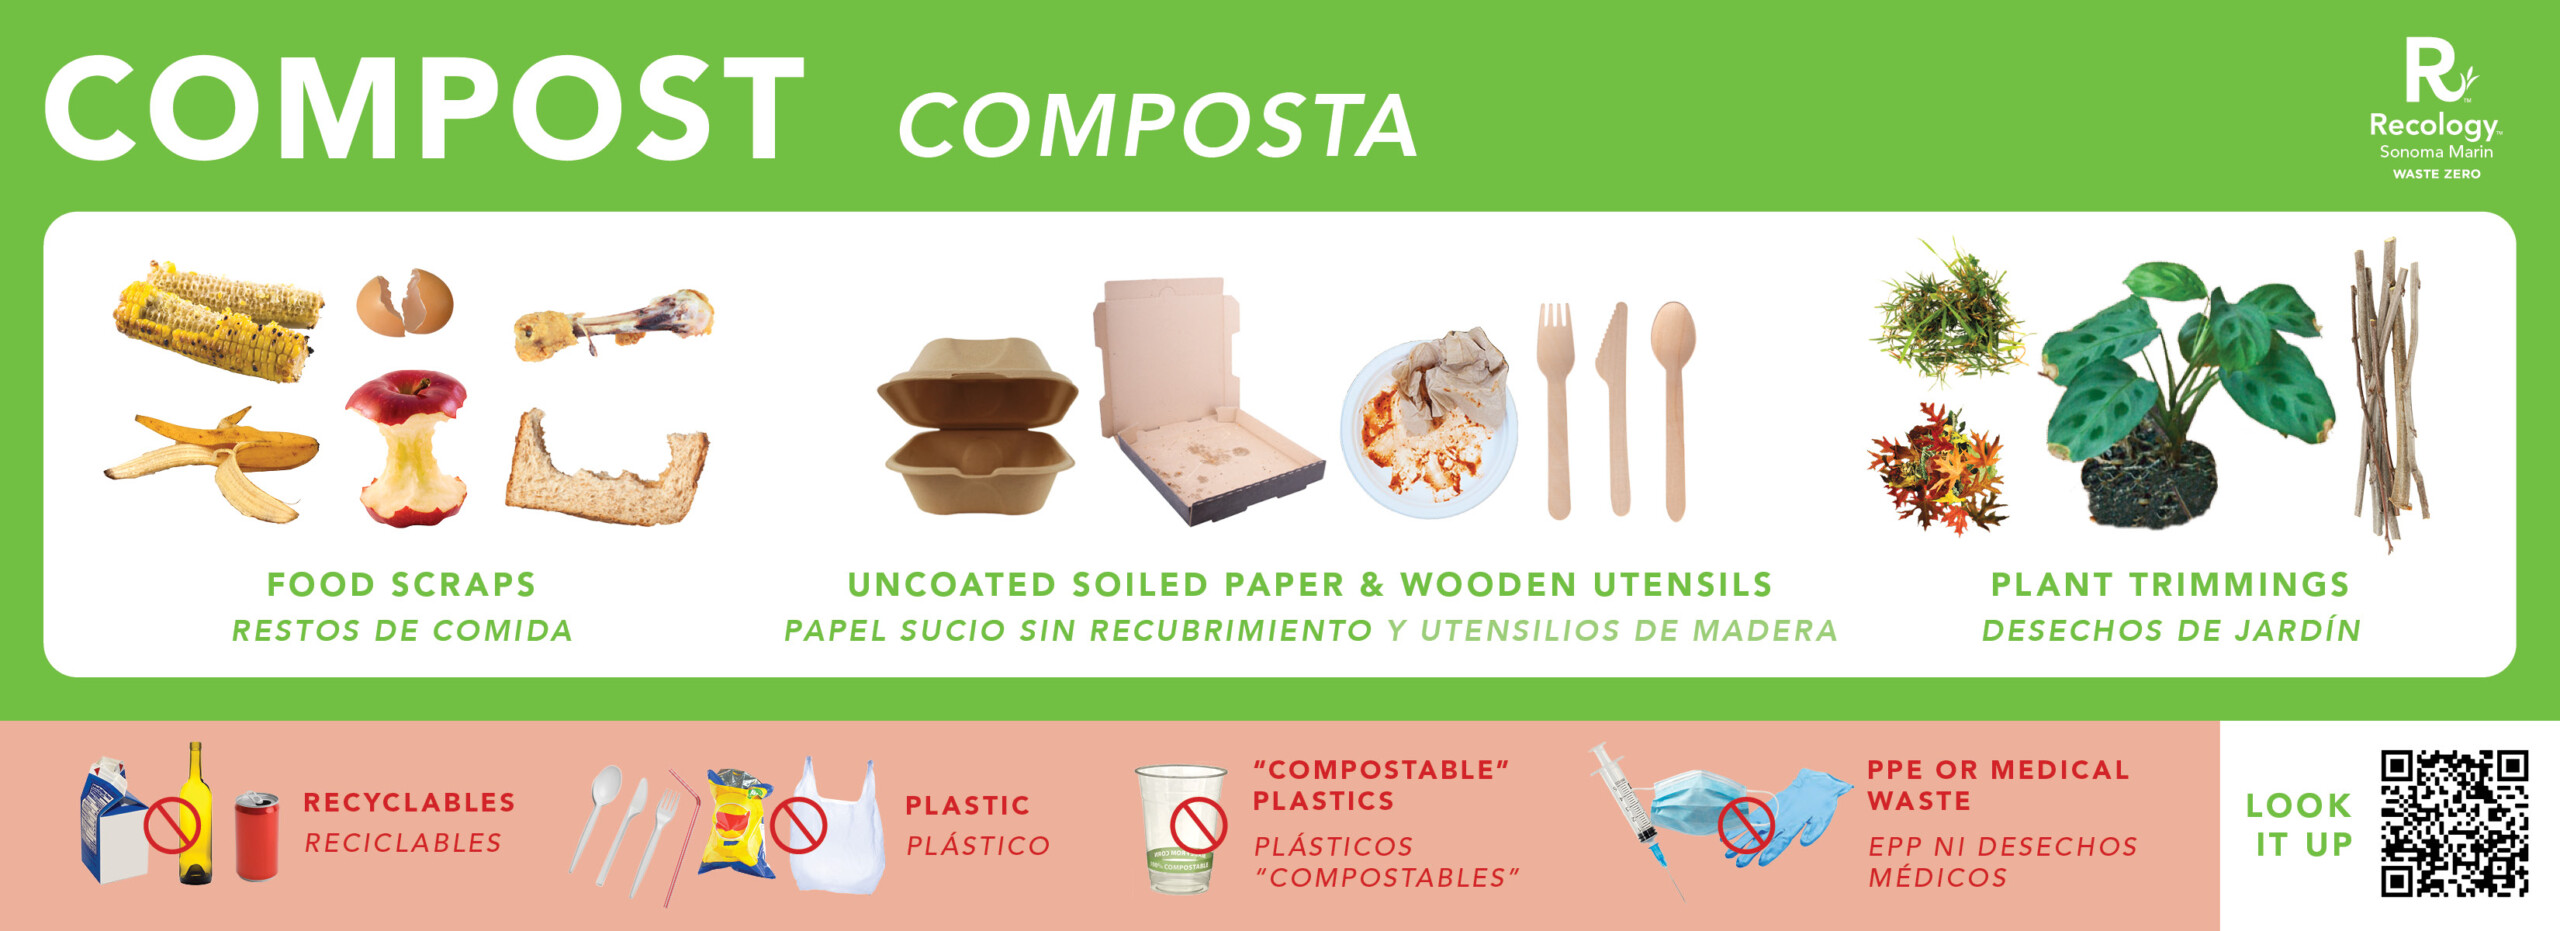 Compost Made Easy - Recology